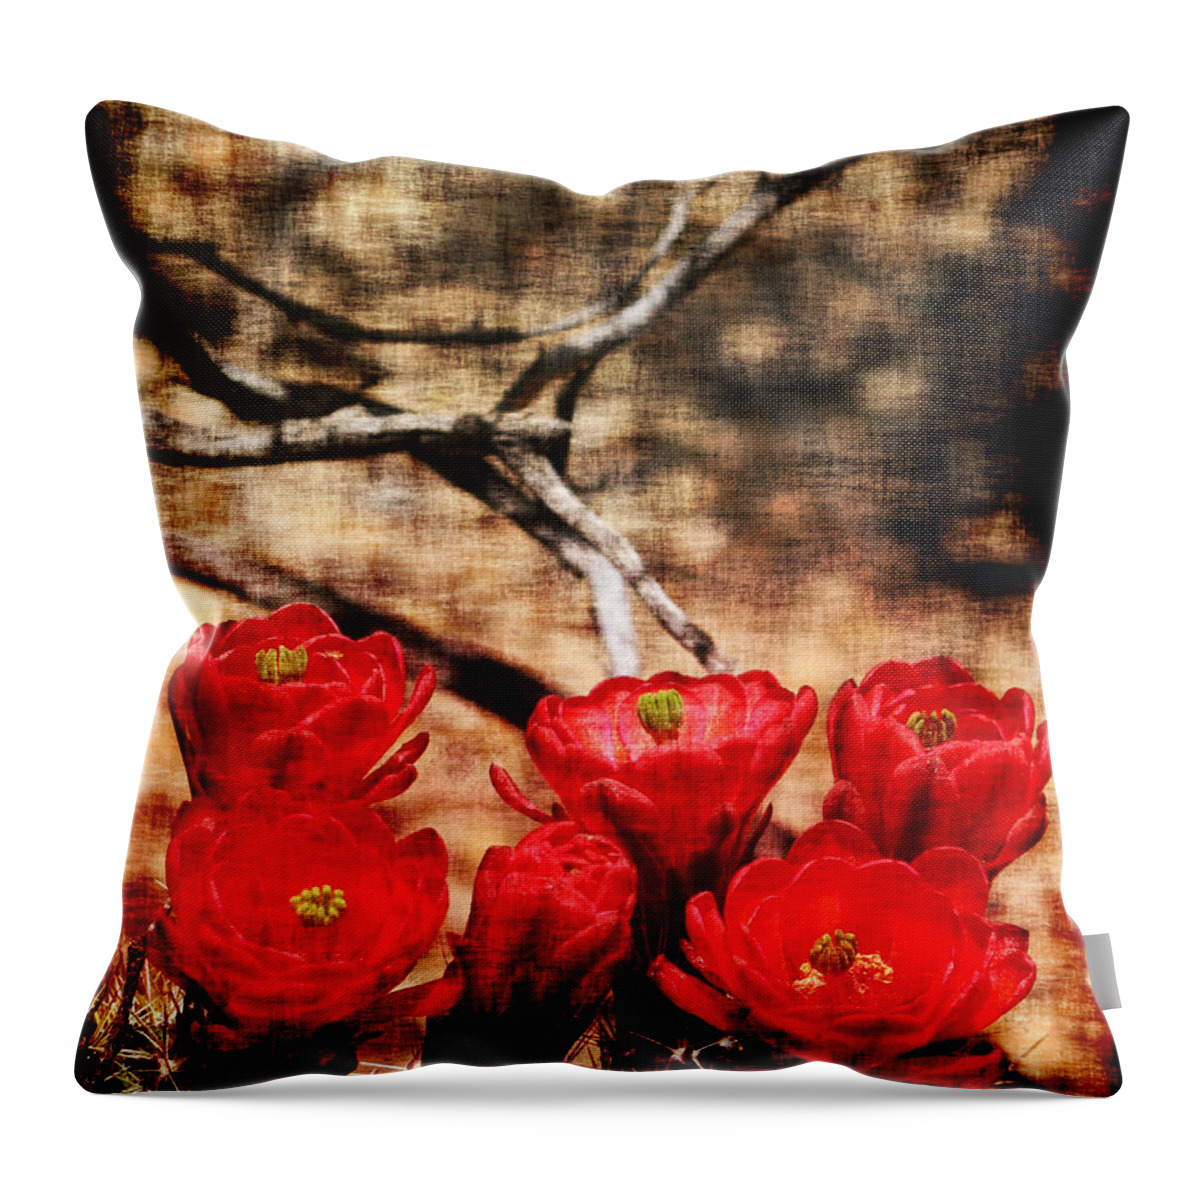 Cactus Throw Pillow featuring the photograph Cactus Flowers 2 by Julie Lueders 